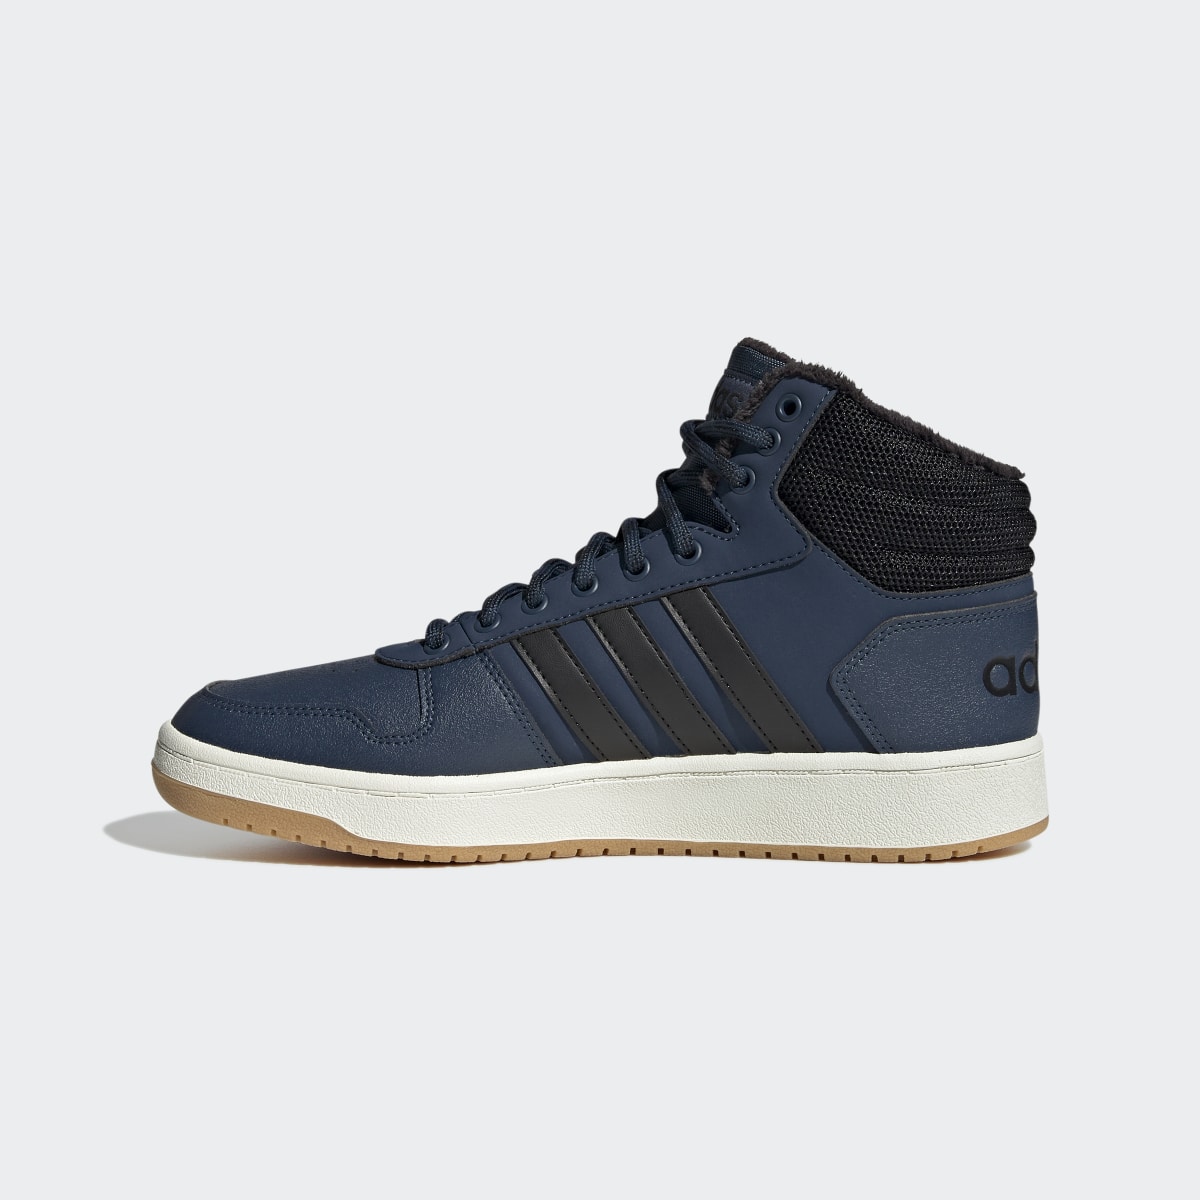 Adidas Chaussure Hoops 2.0 Mid. 7